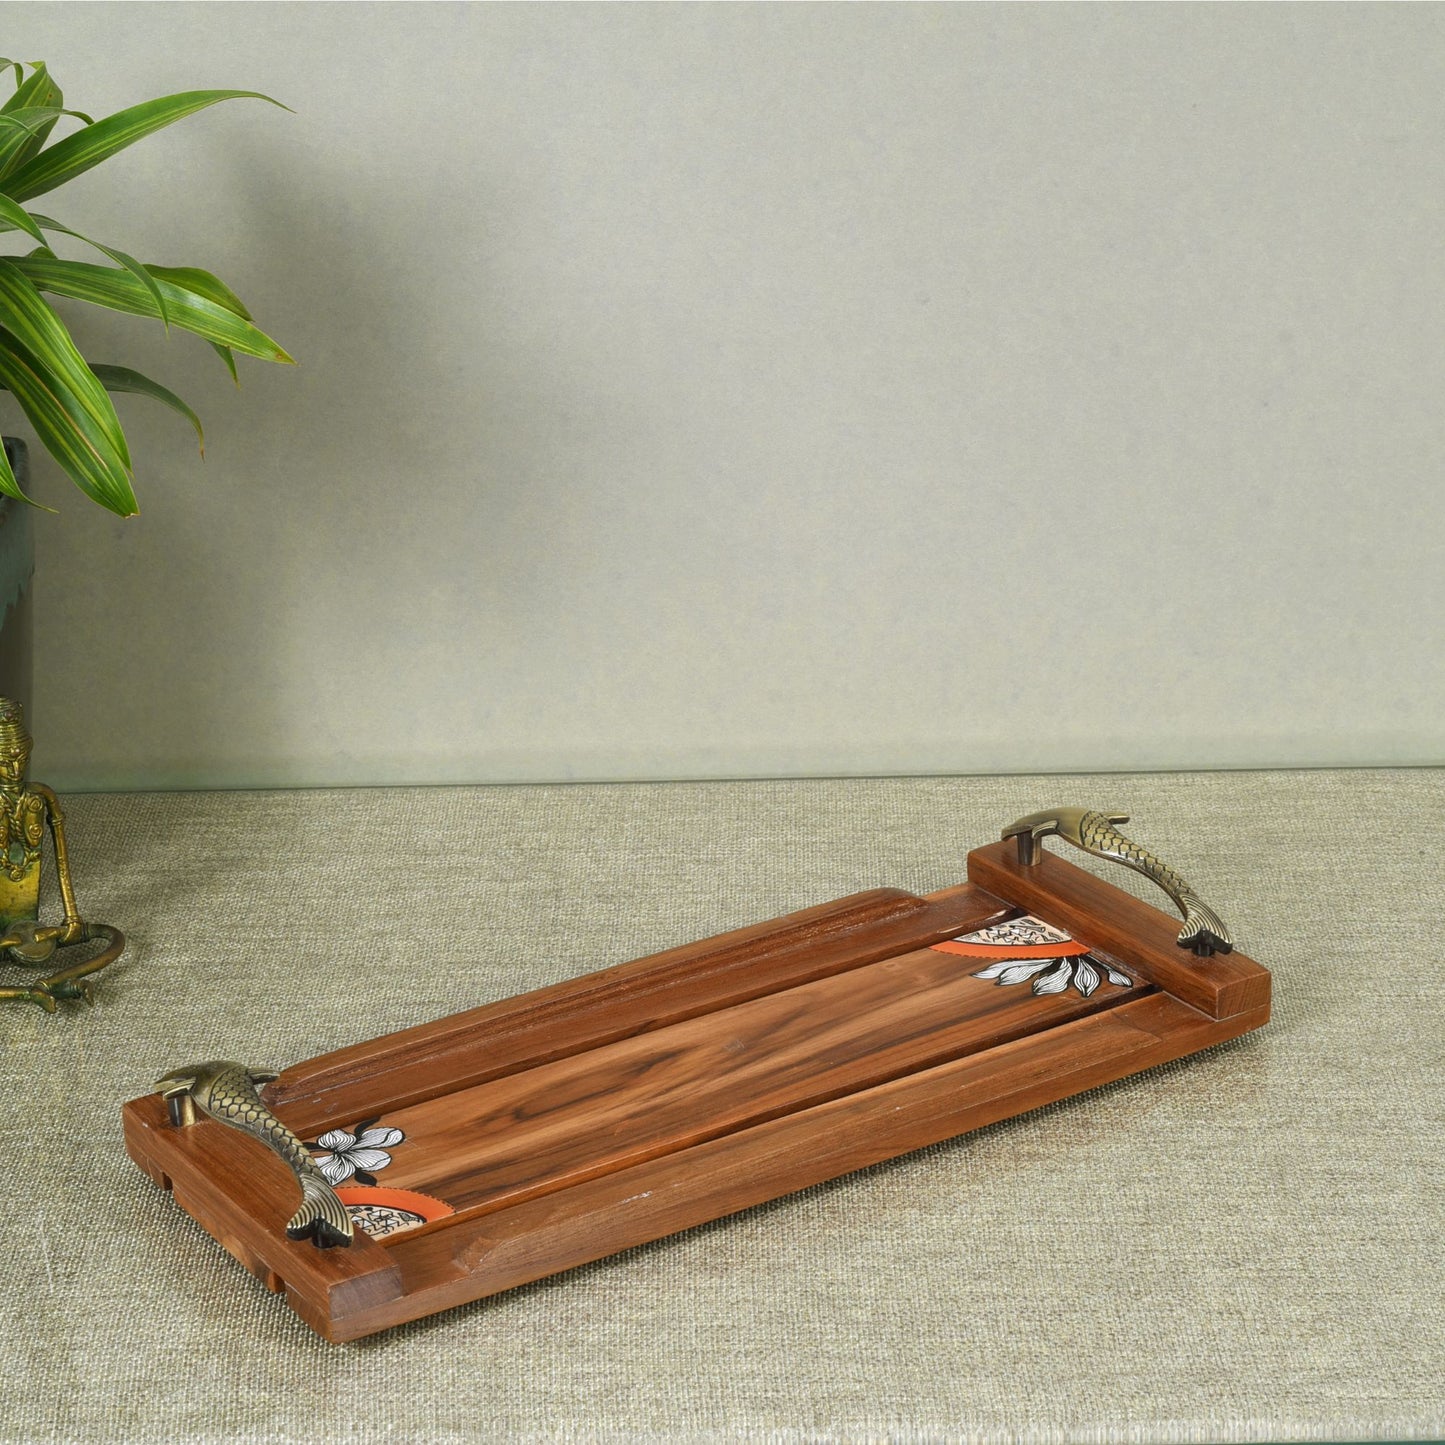 Flora Handcrafted Serving Tray (15x6x2)